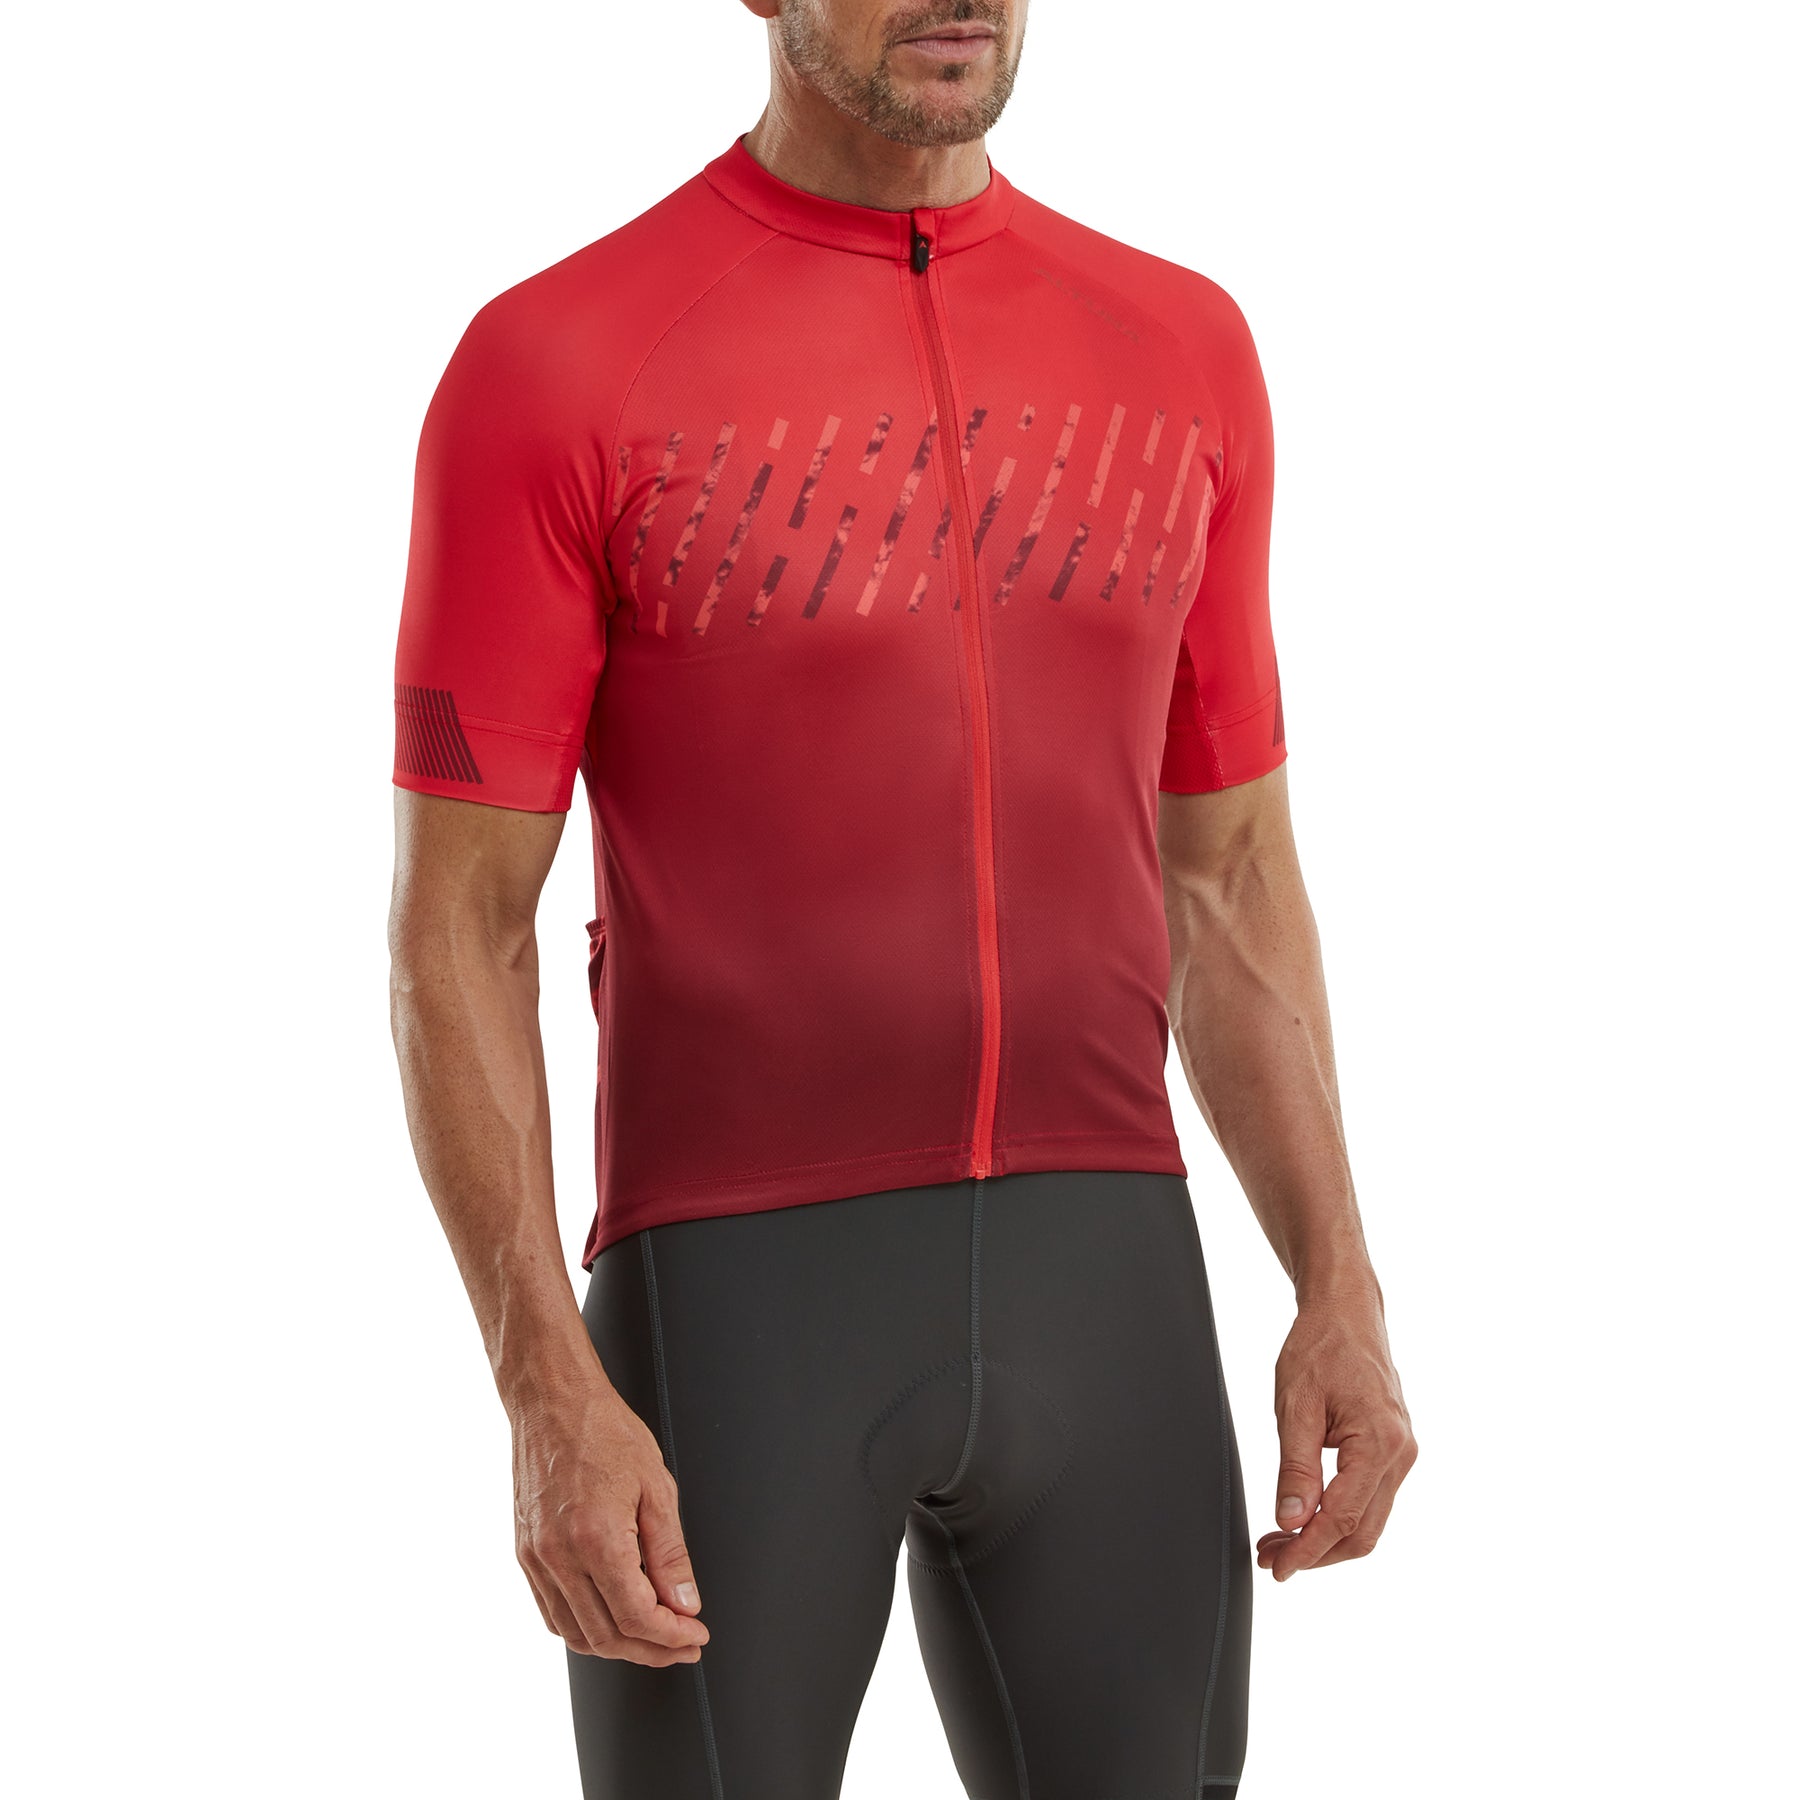 Altura Airstream Men's Short Sleeve Cycling Jersey Red S